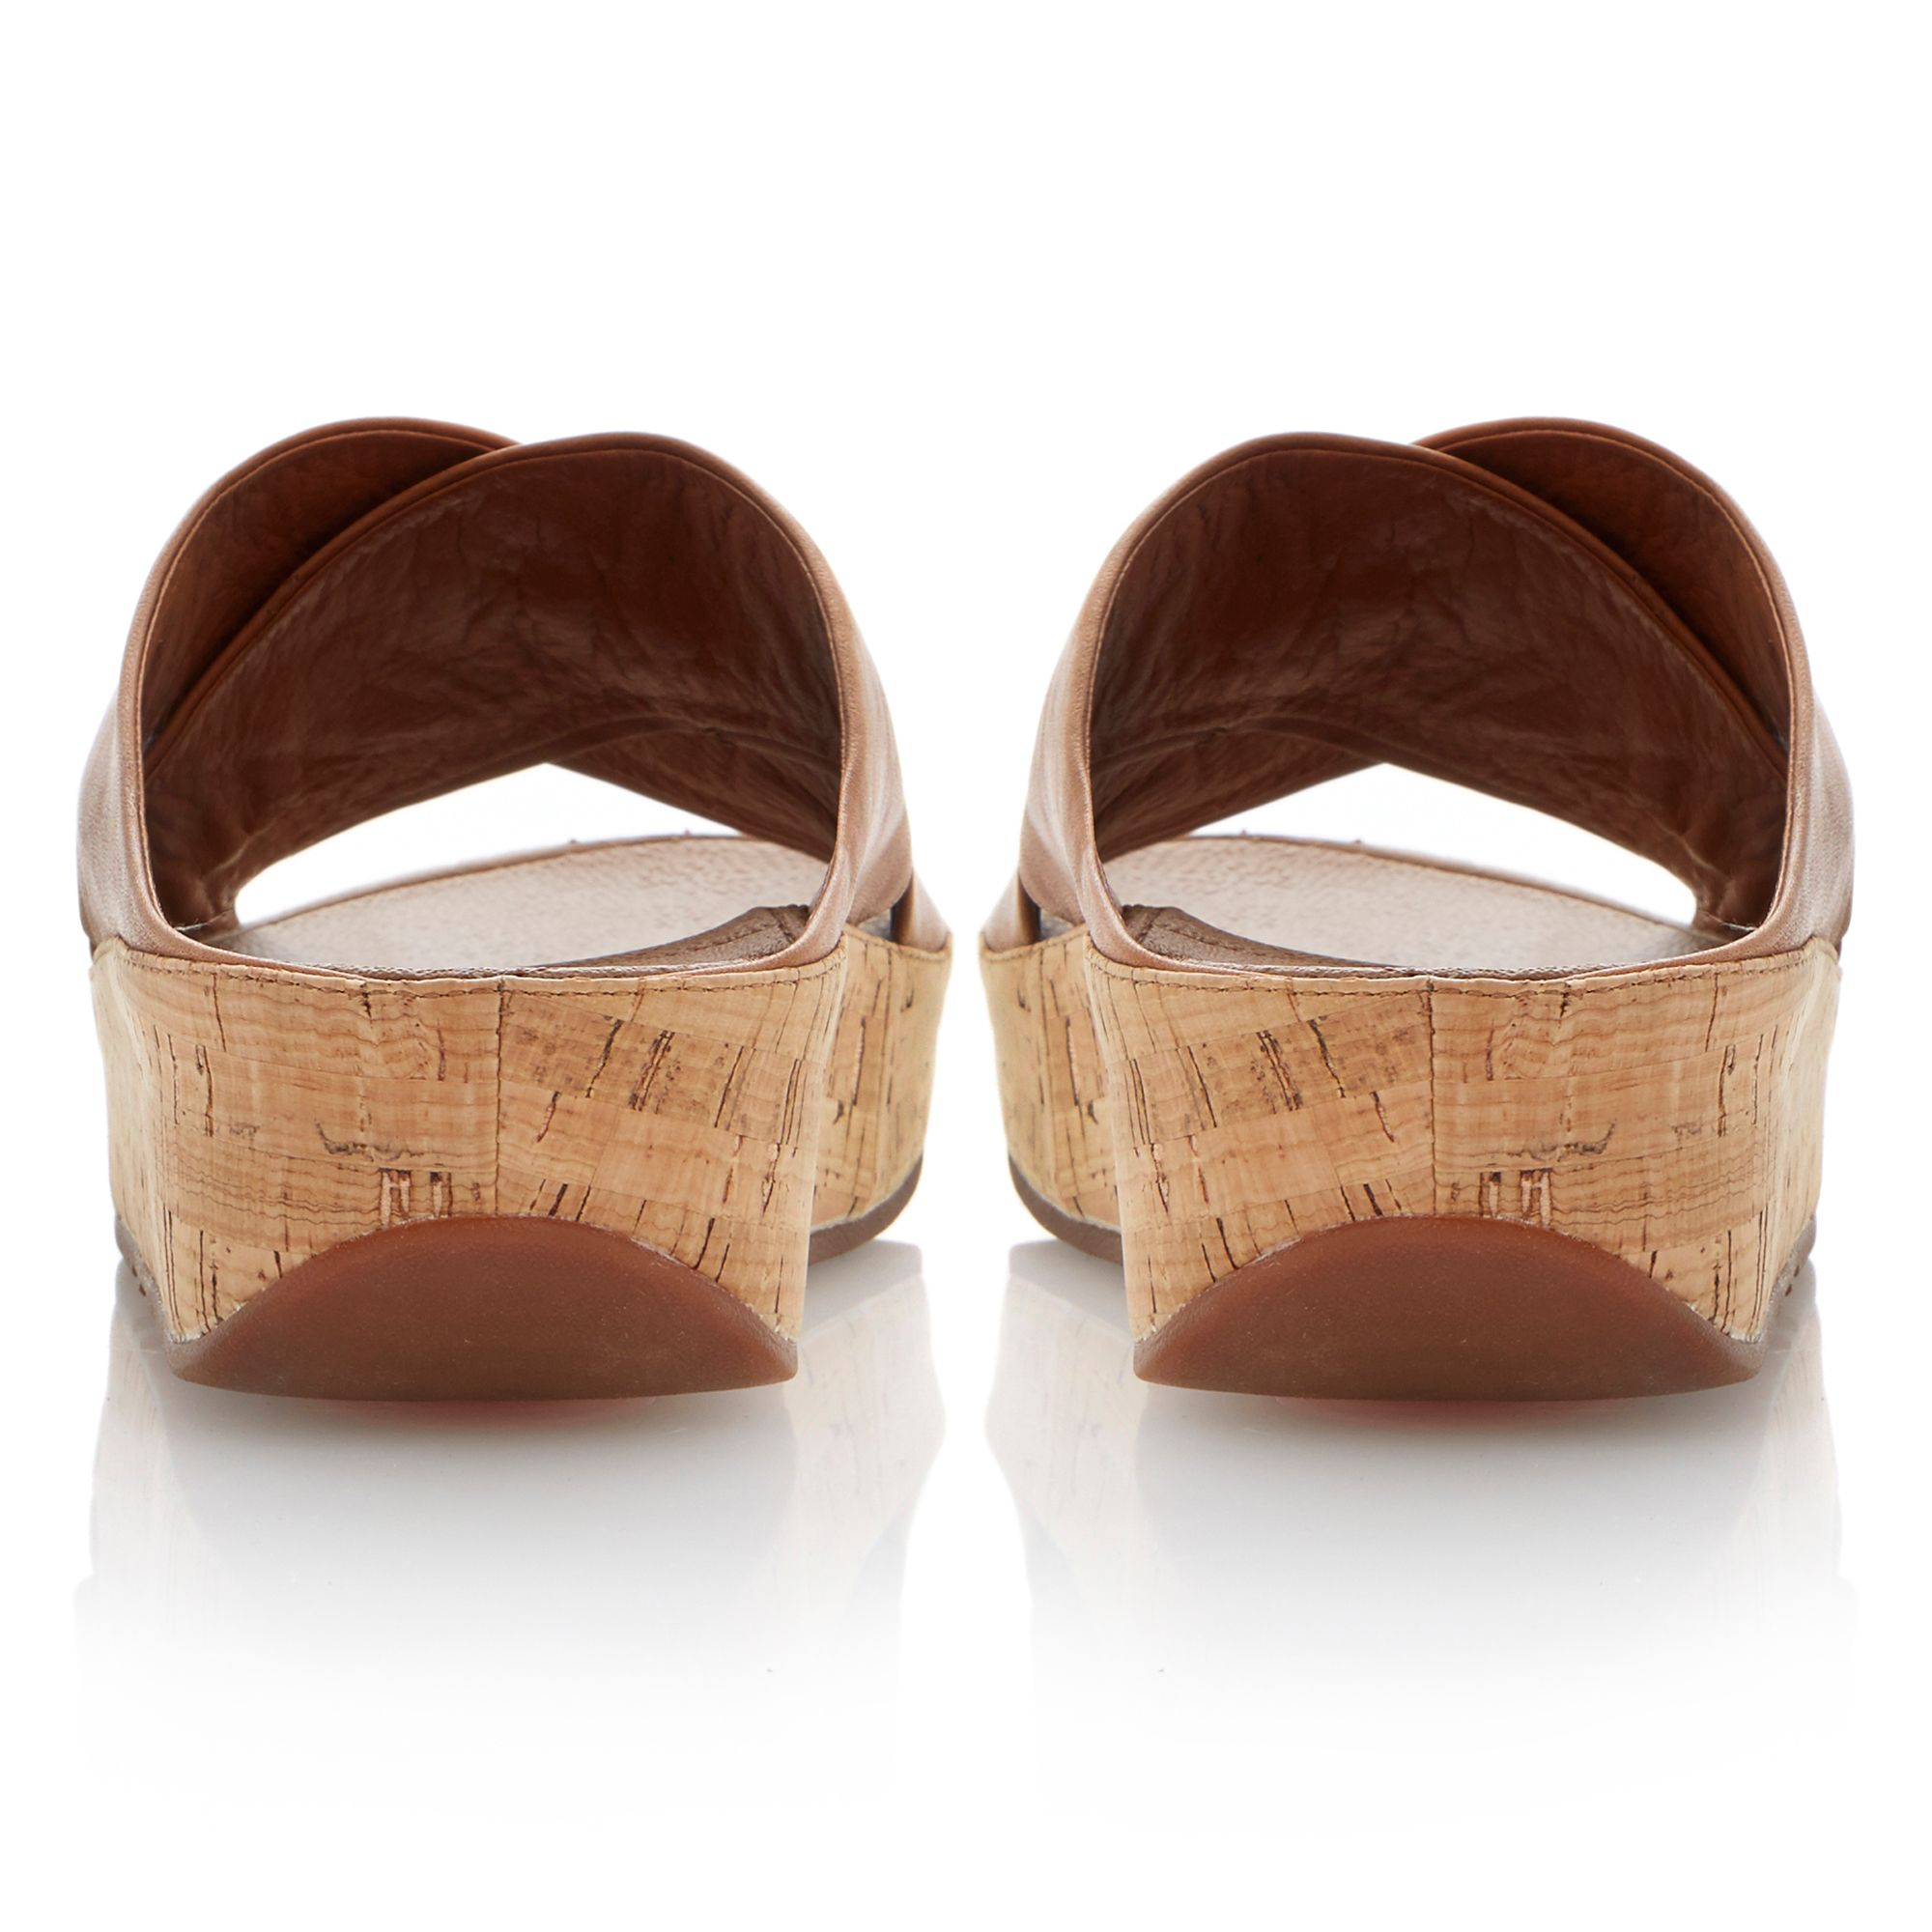 Fitflop Kys Leather Round Toe Crossover Wedge Sandals in Brown (Tan) | Lyst